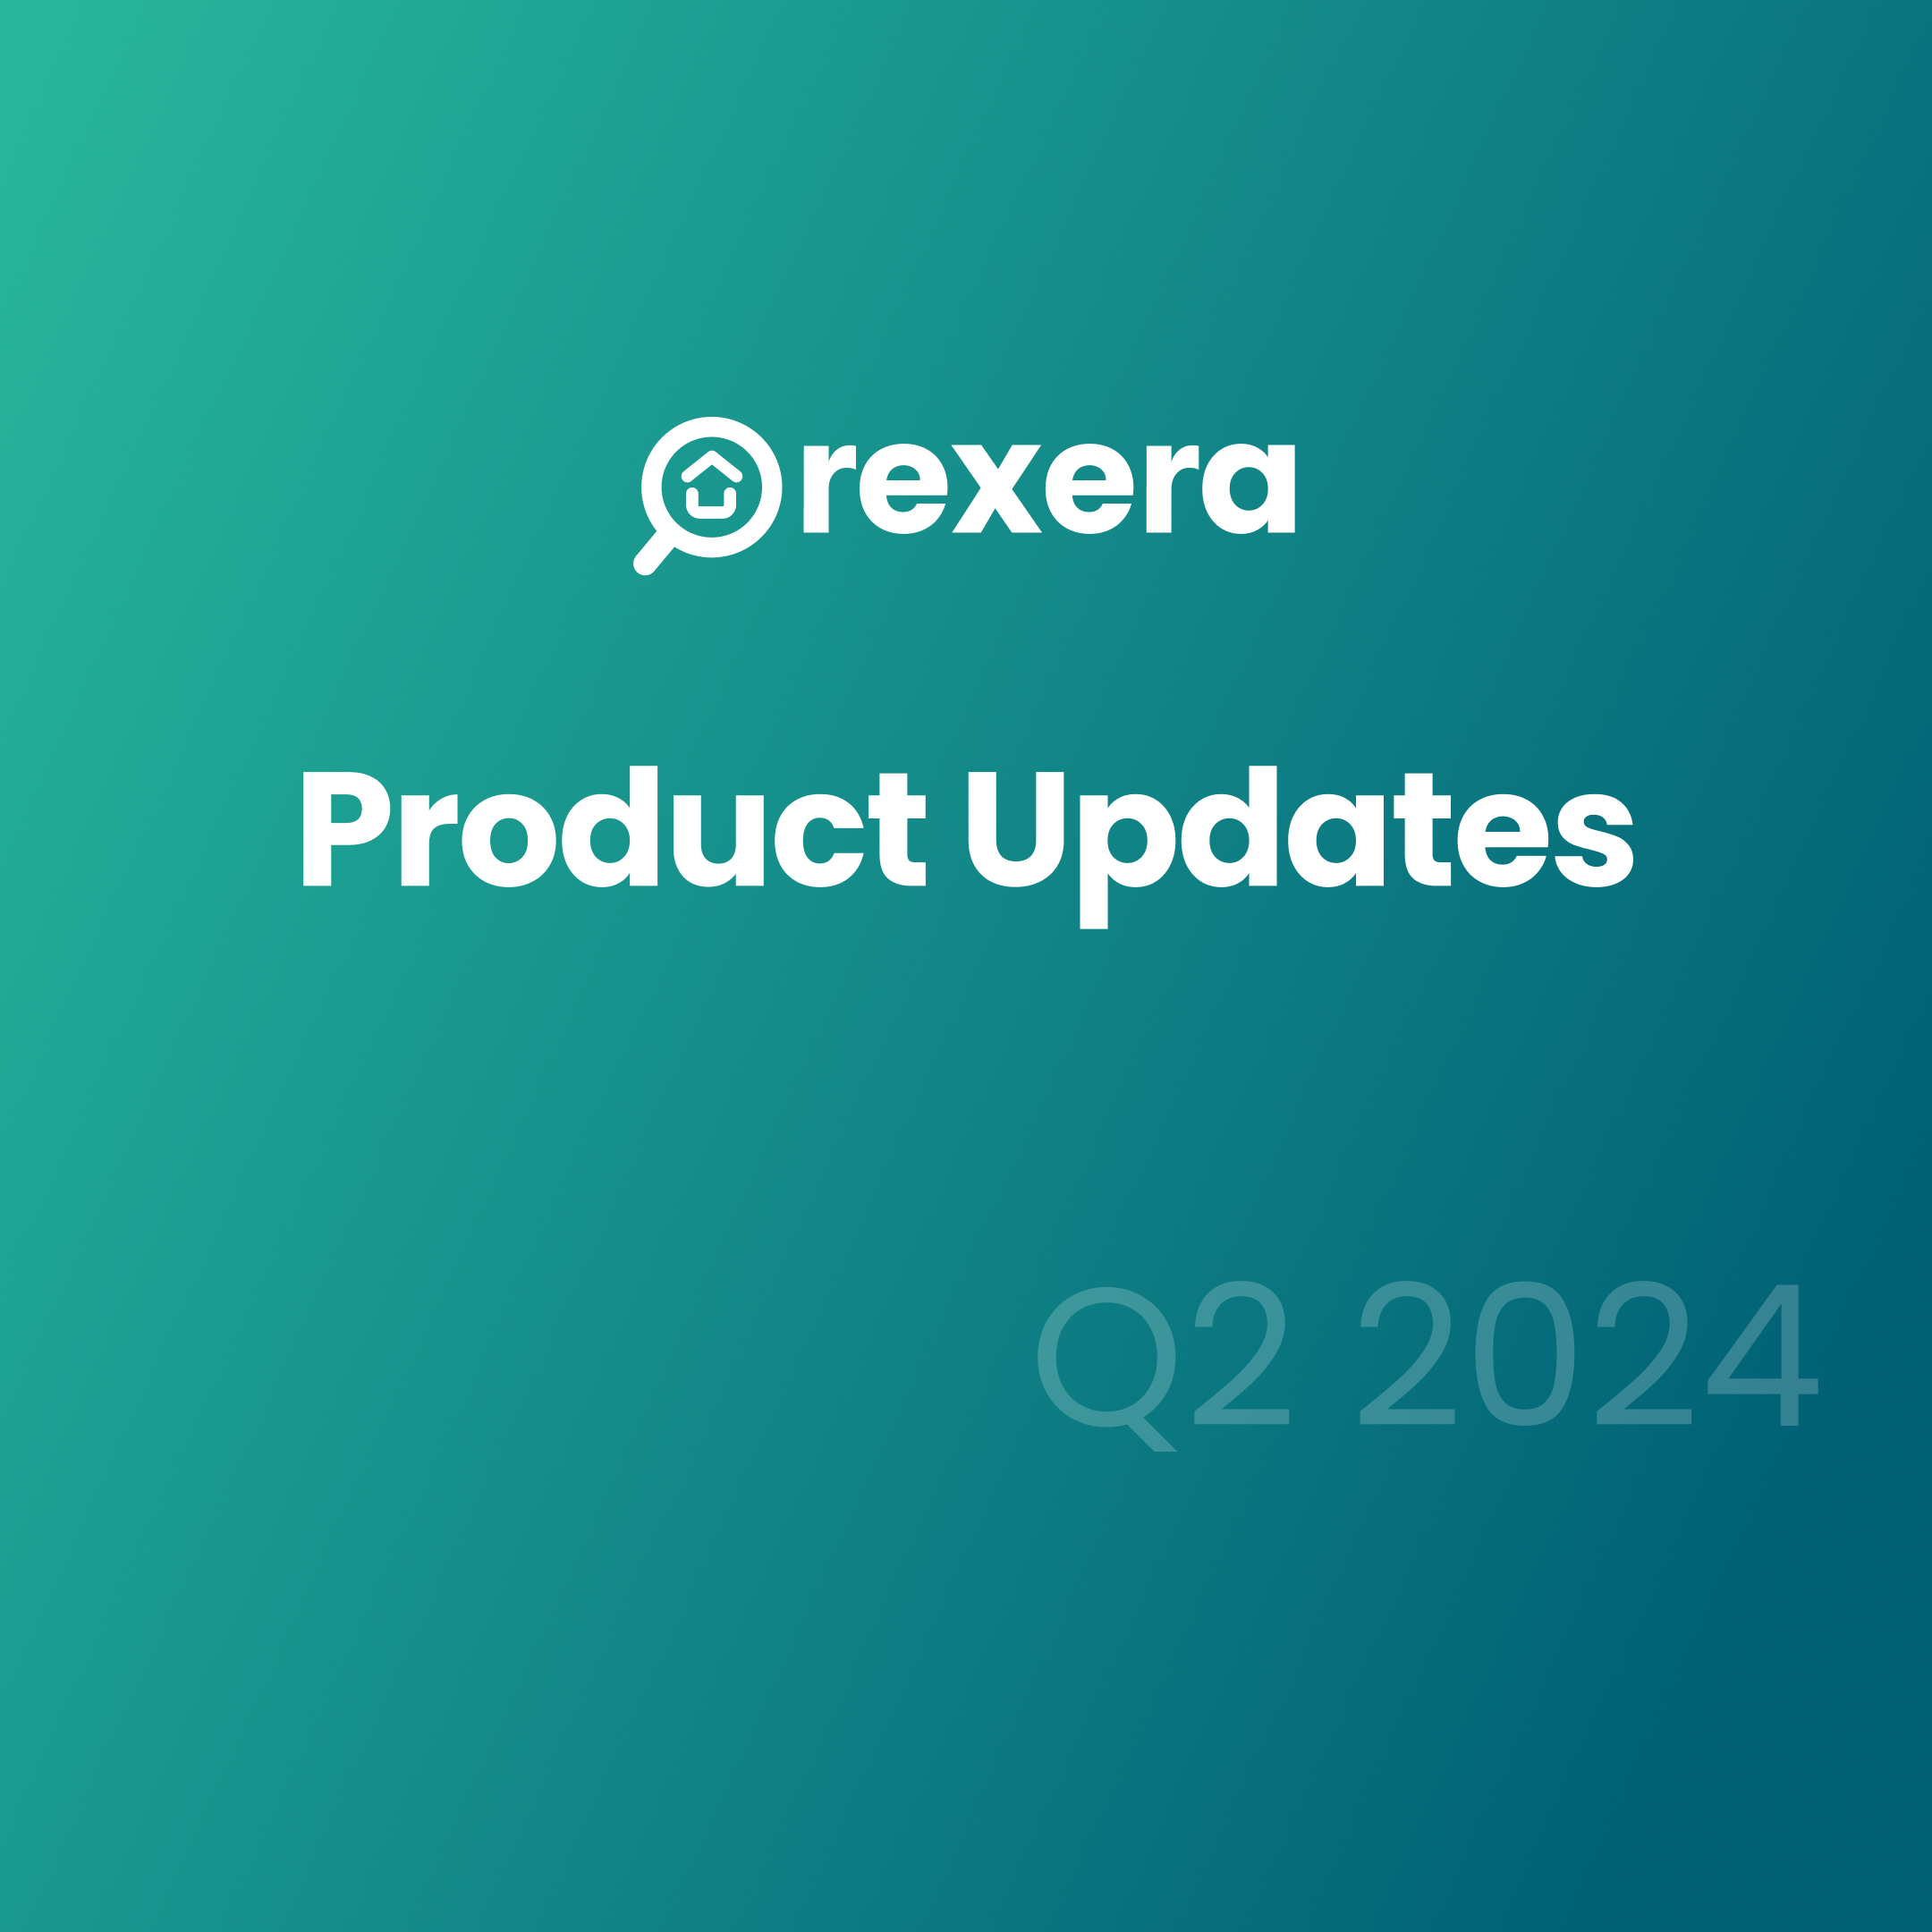 Check out our newest product updates 📦